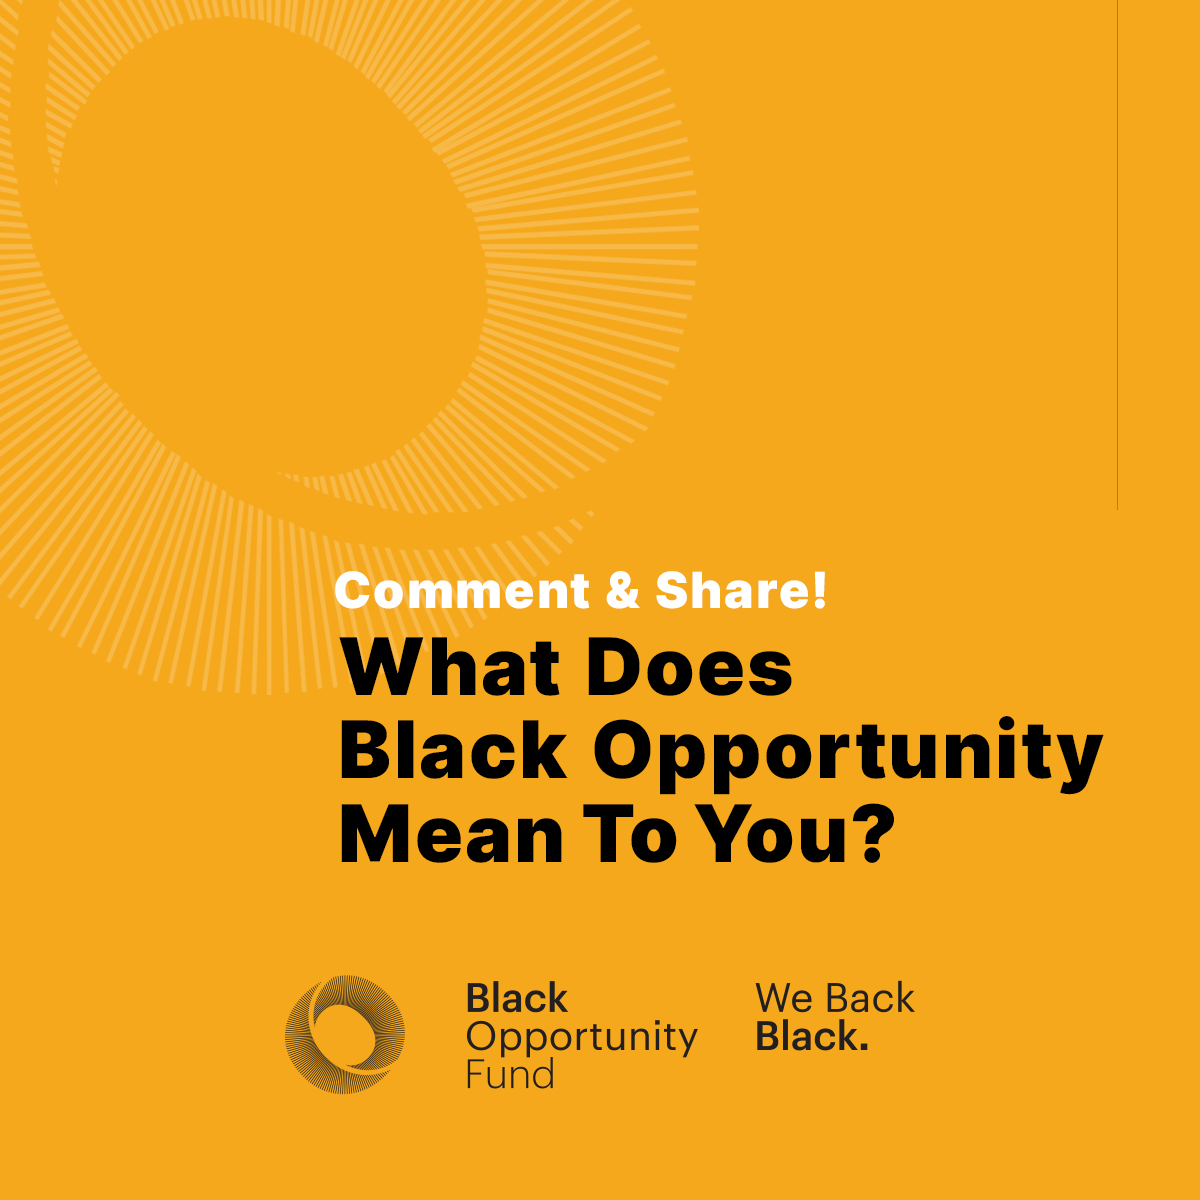 What does Black Opportunity mean to you? Share your ideas on resources, programs, government policy, and more in the comments! #WeBackBlack #BOF #BlkOpportunity